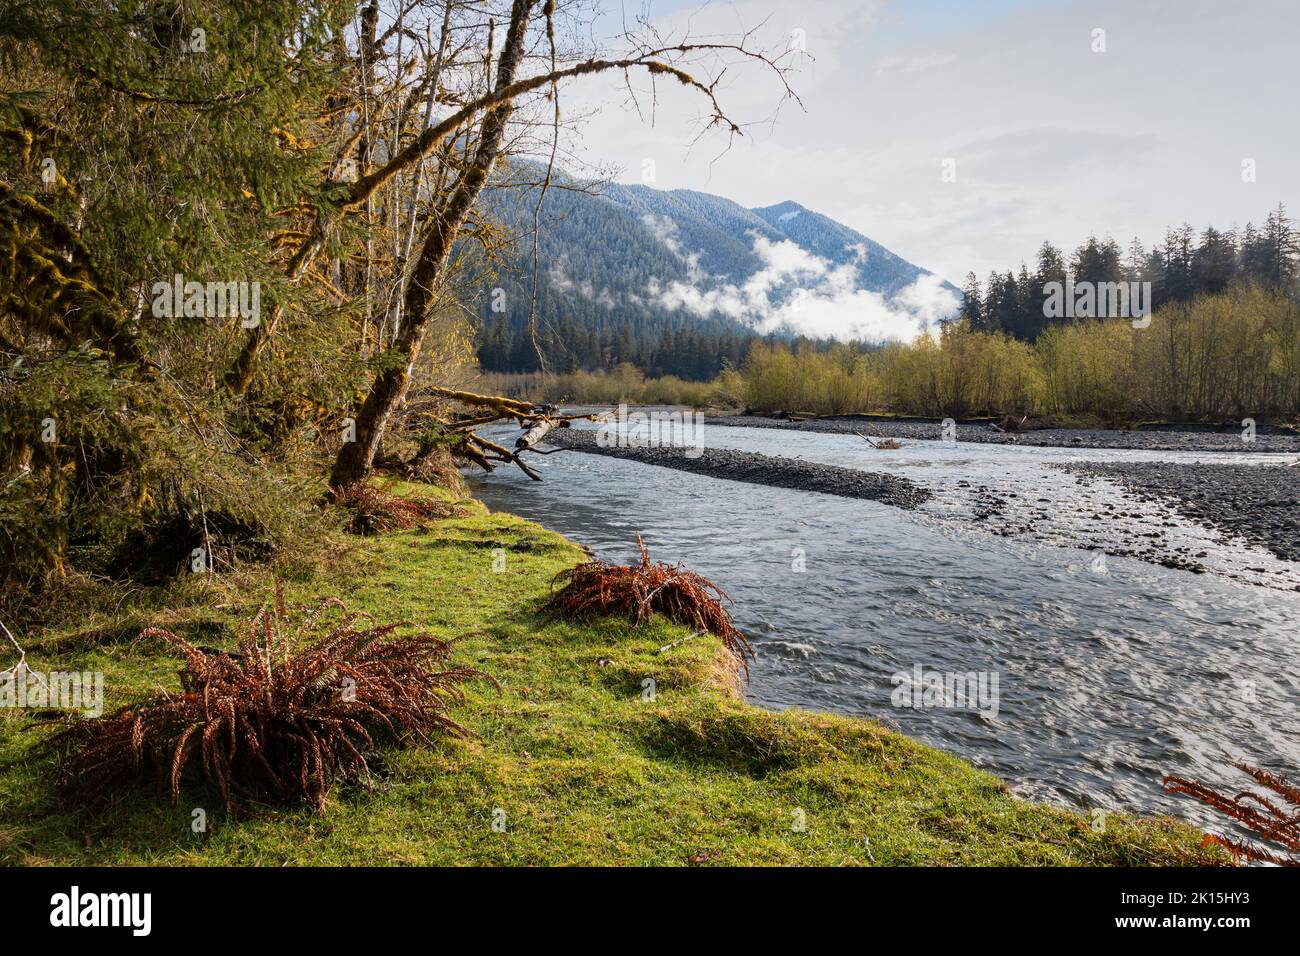 WA22031-00...WASHINGTON - The Hoh River in the Hoh River Valley in the rain forest area of Olympic National Park. Stock Photo